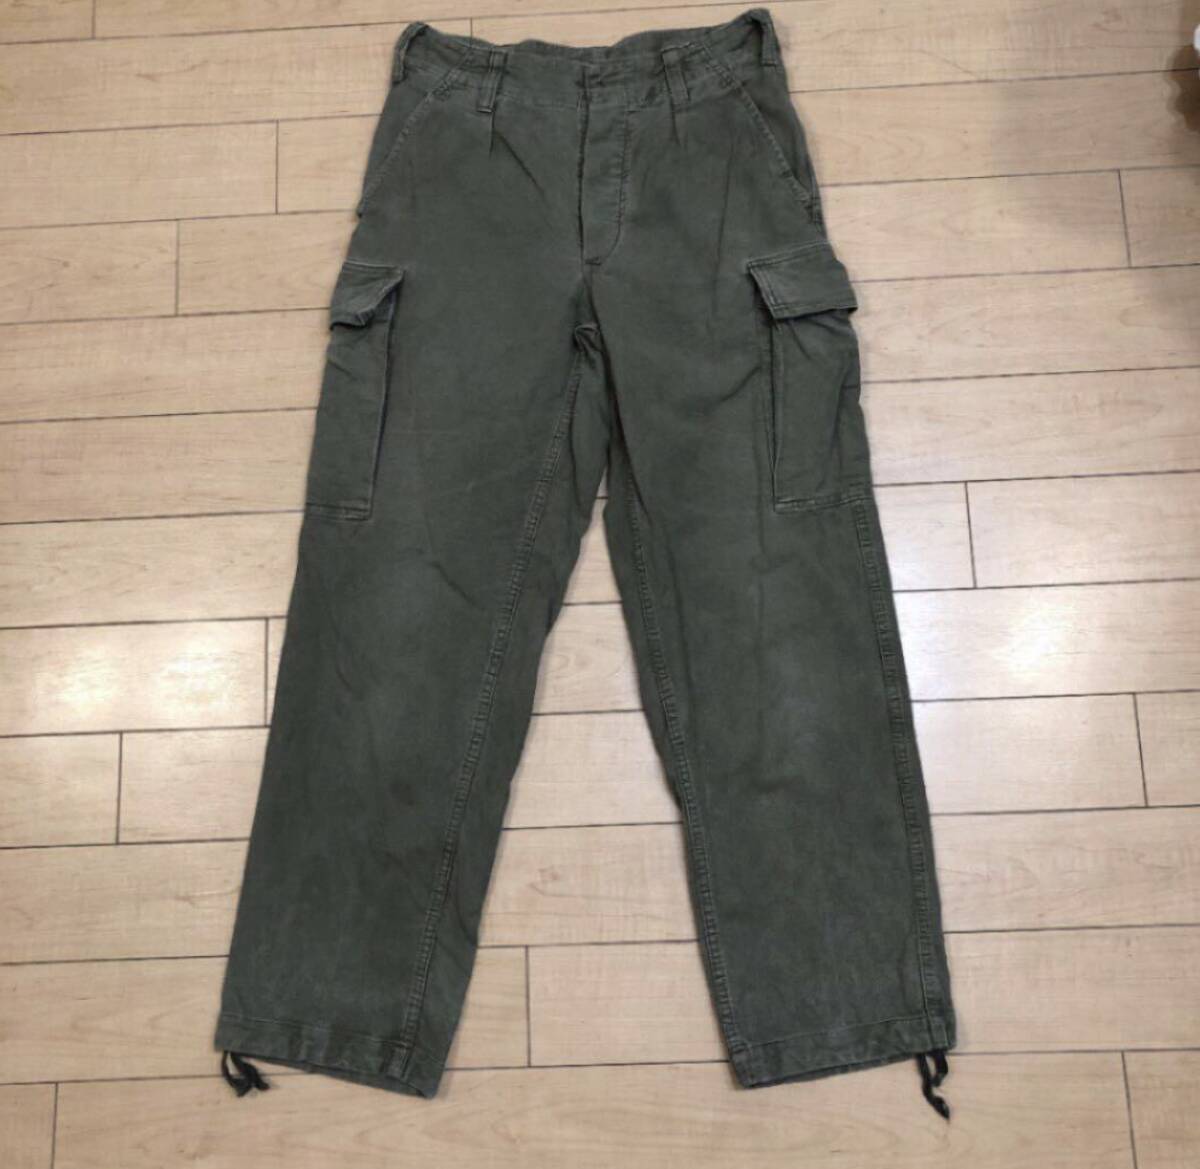  Vintage 1989 year made Germany army cargo pants wide pants khaki 